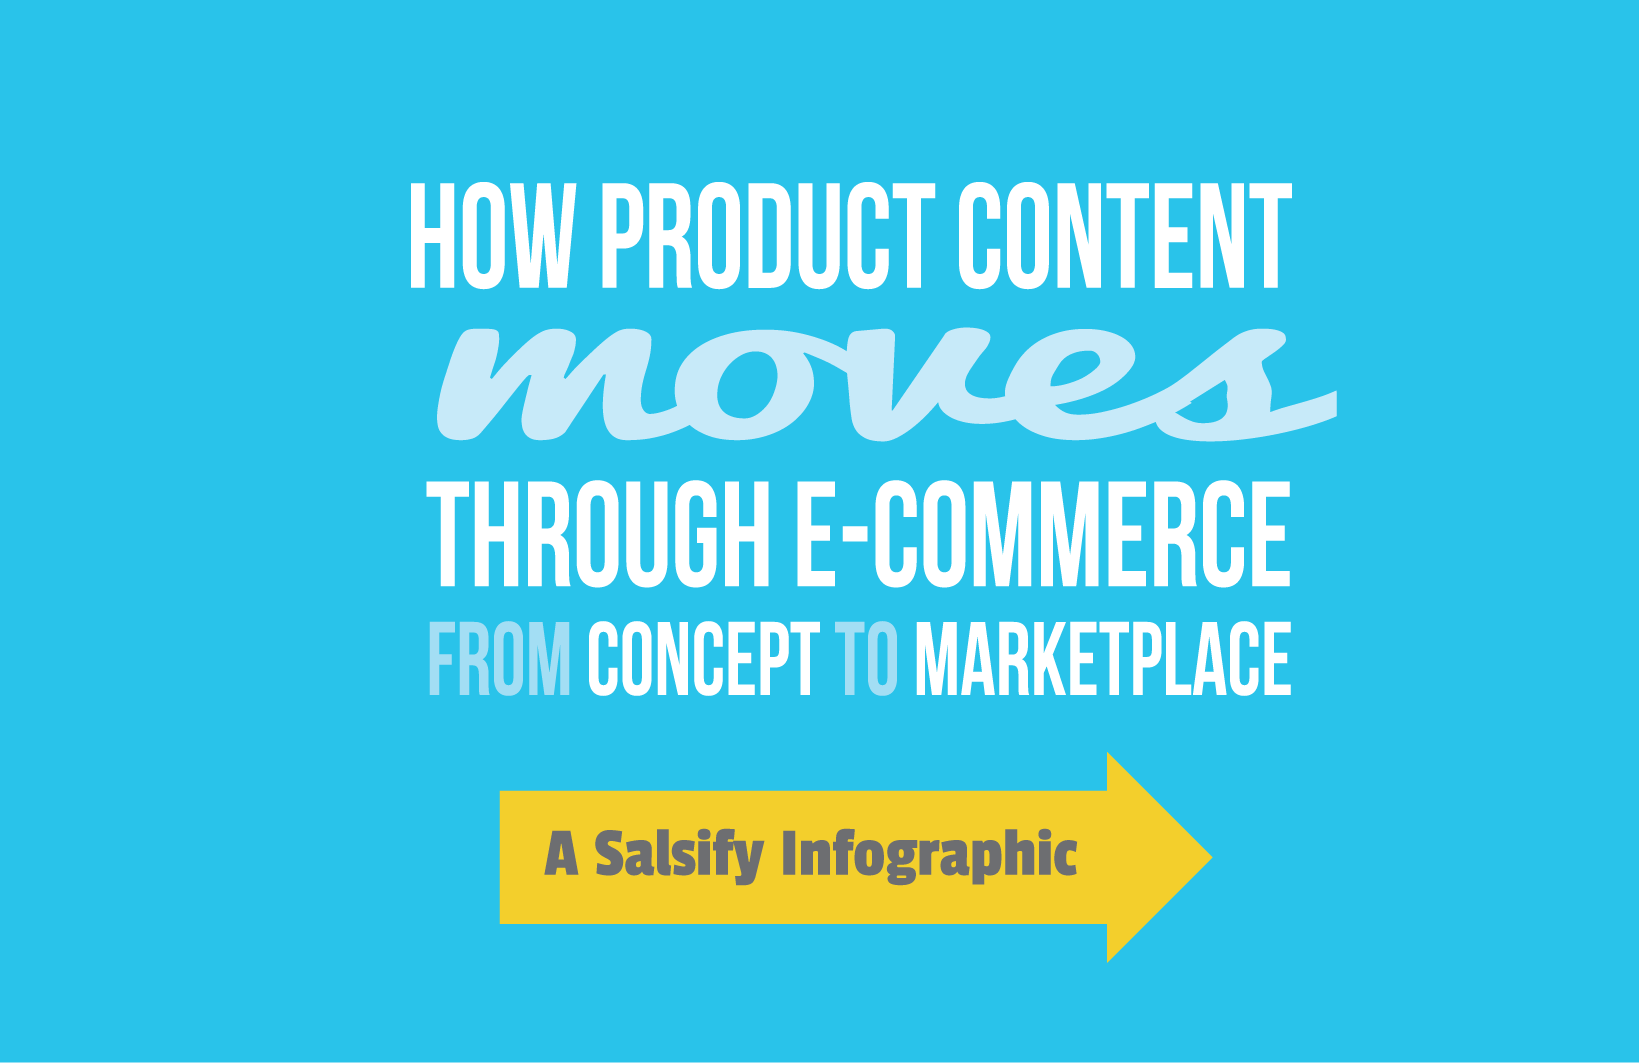 Infographic: How Product Content Moves through E-Commerce